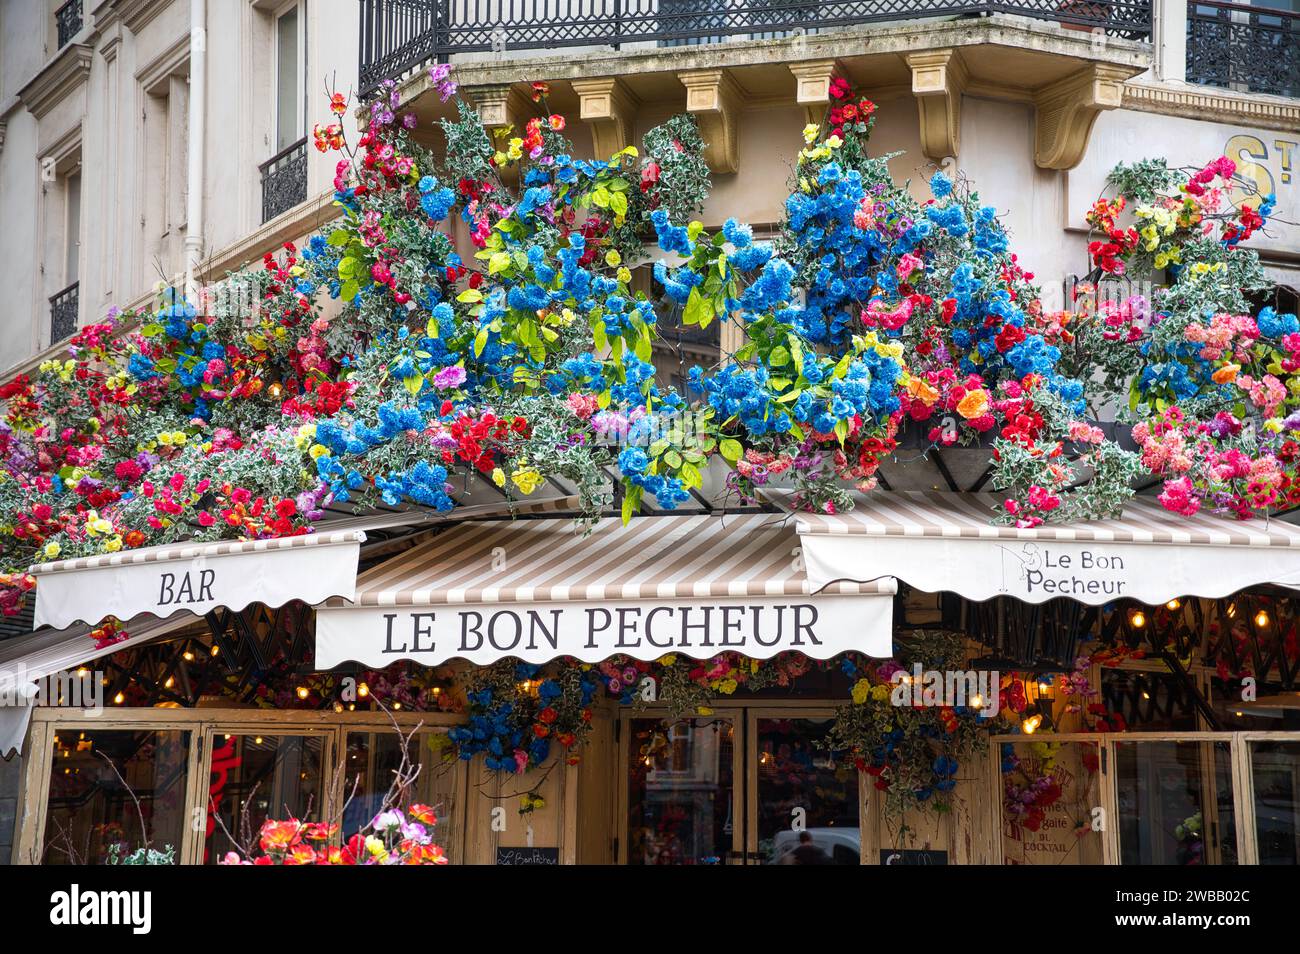 streetview of a bar in Paris Intense colors beautiful flower decorations Stock Photo